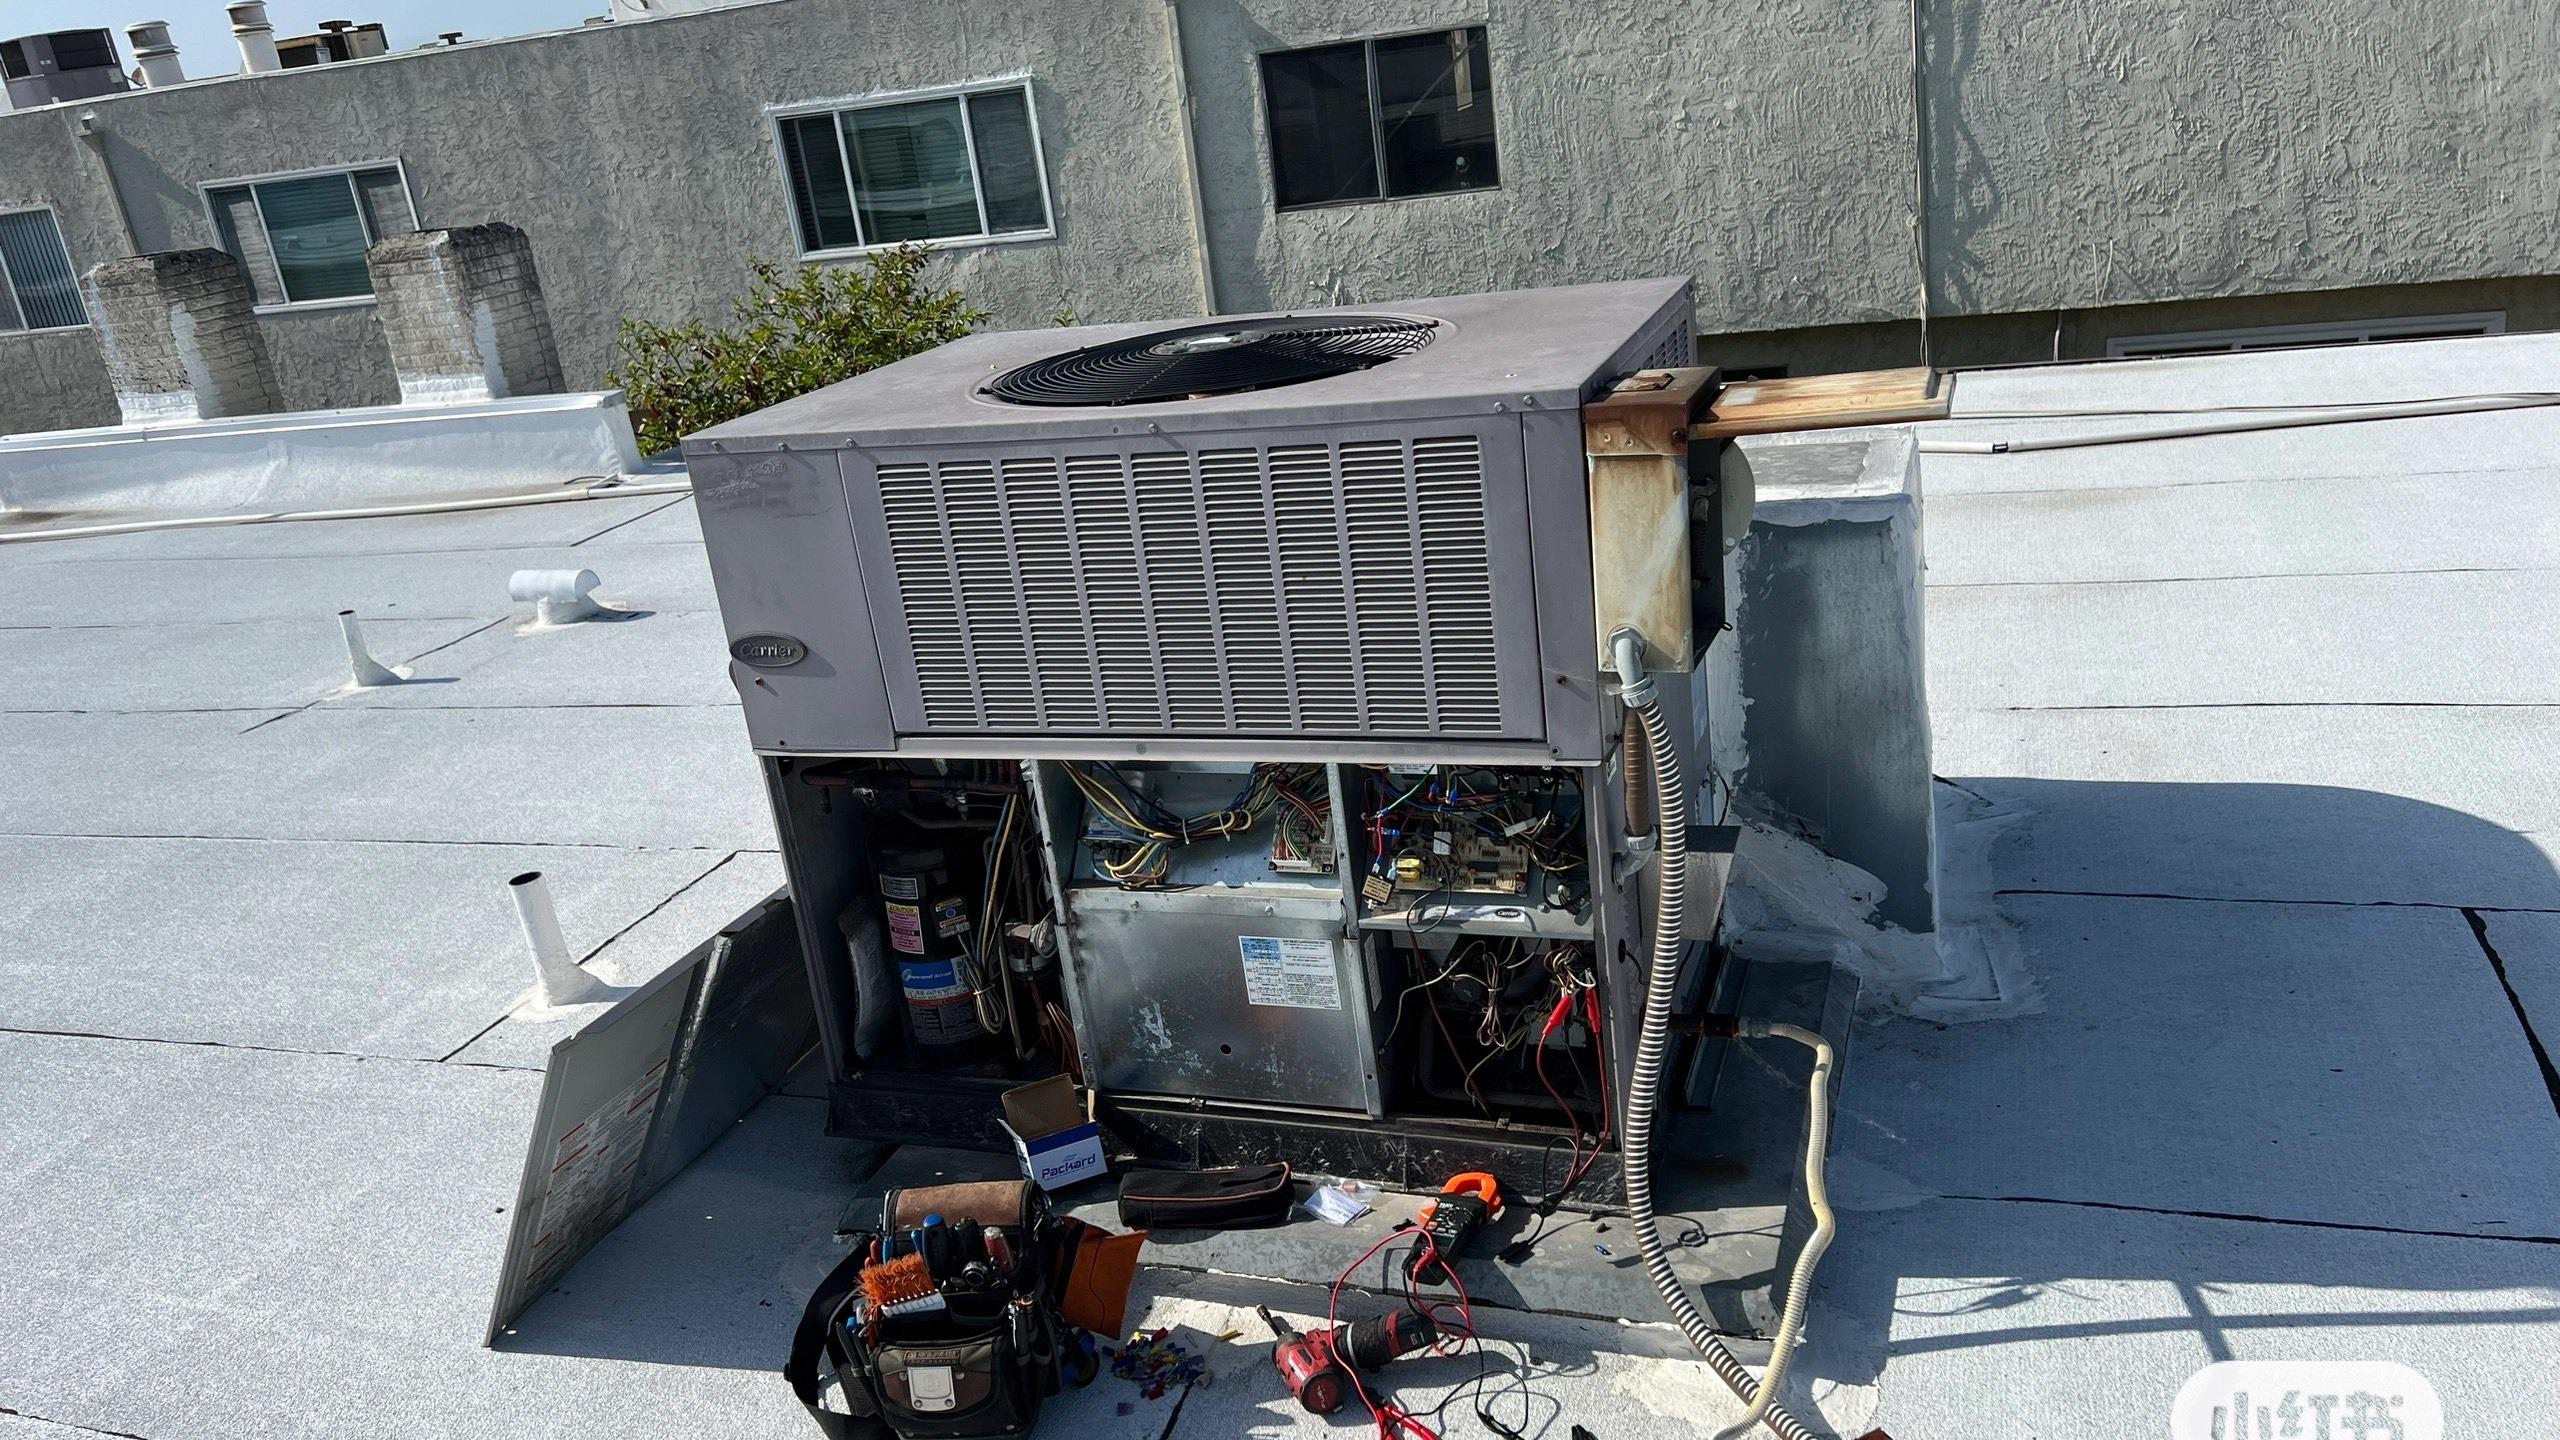 Tai Chi Heating & Air Conditioning specializes in central air conditioning services that keep your entire home cool and comfortable. From installations to repairs, we offer solutions that maintain the efficient performance of your central AC system.